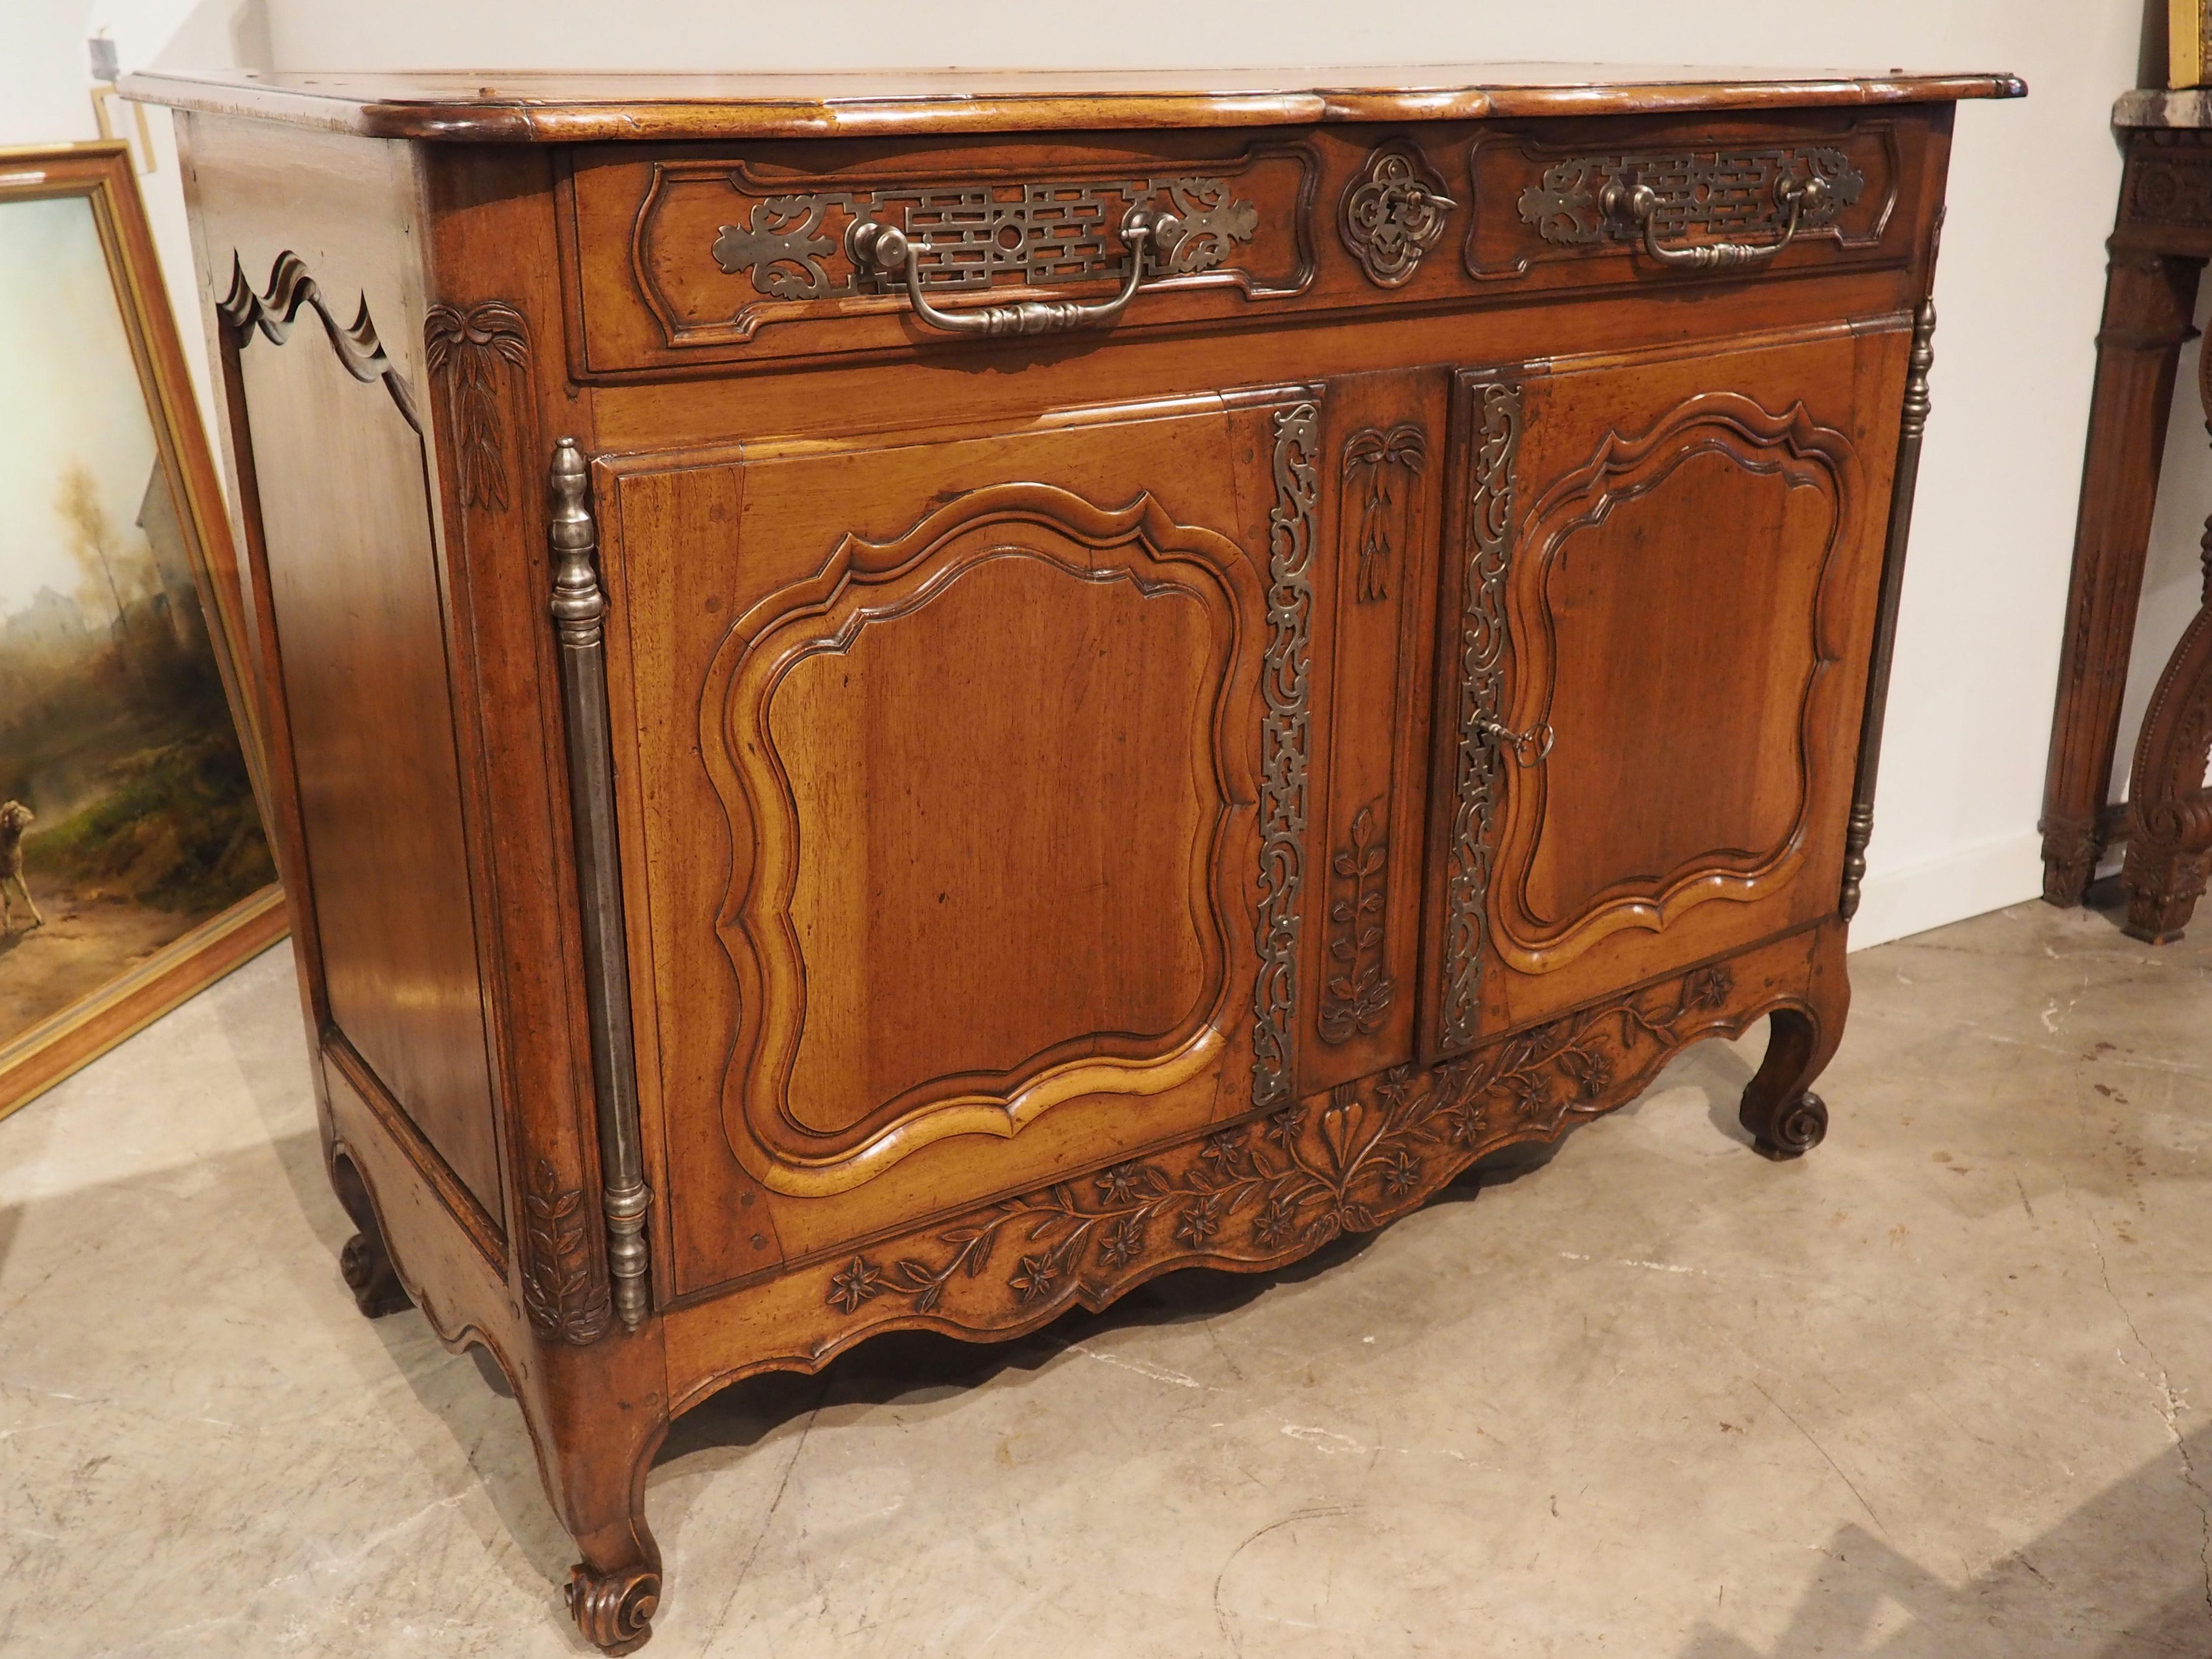 During the reign of Louis XV in the 1700’s, French menuisiers were skilled wood workers that specialized in solid-wood case storage pieces, such as this buffet from Provence. Hand-carved in walnut wood using round dowel construction, the exquisite